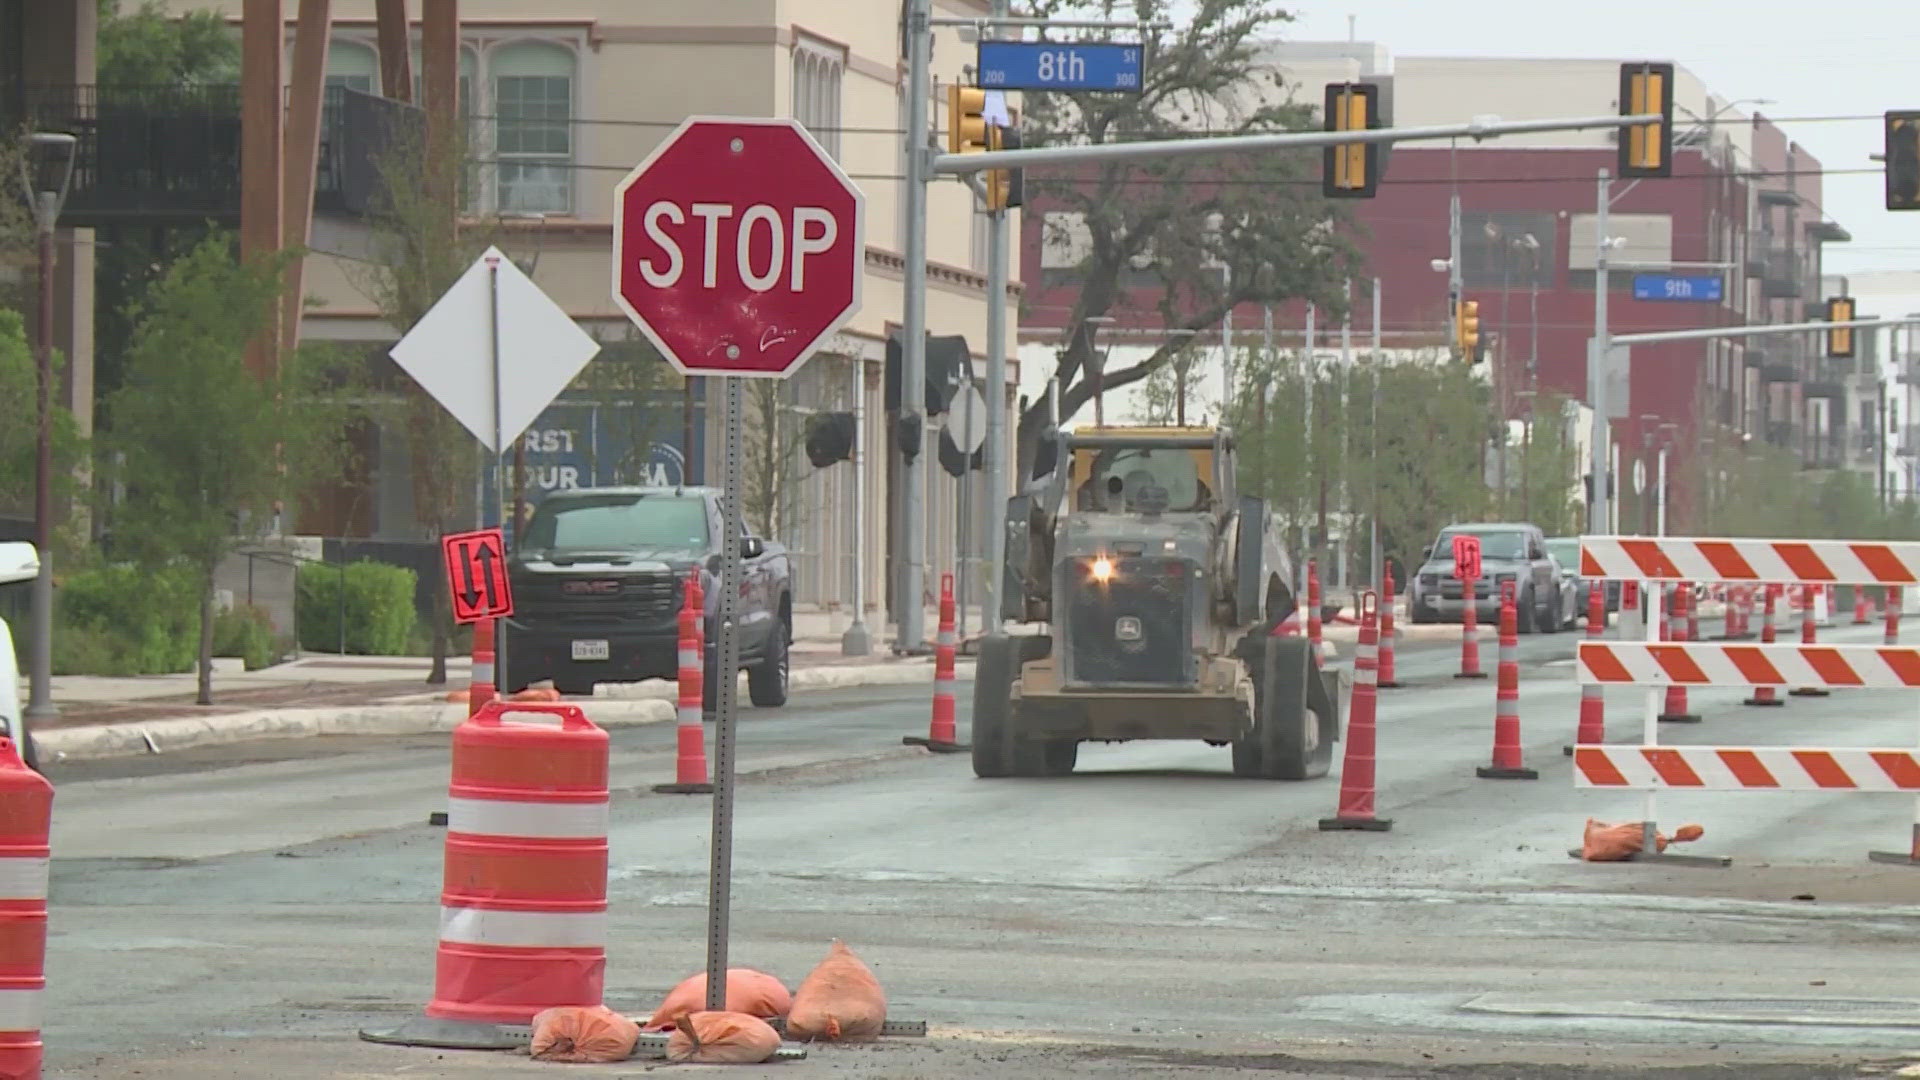 City announced grant applications open for businesses impacted by construction